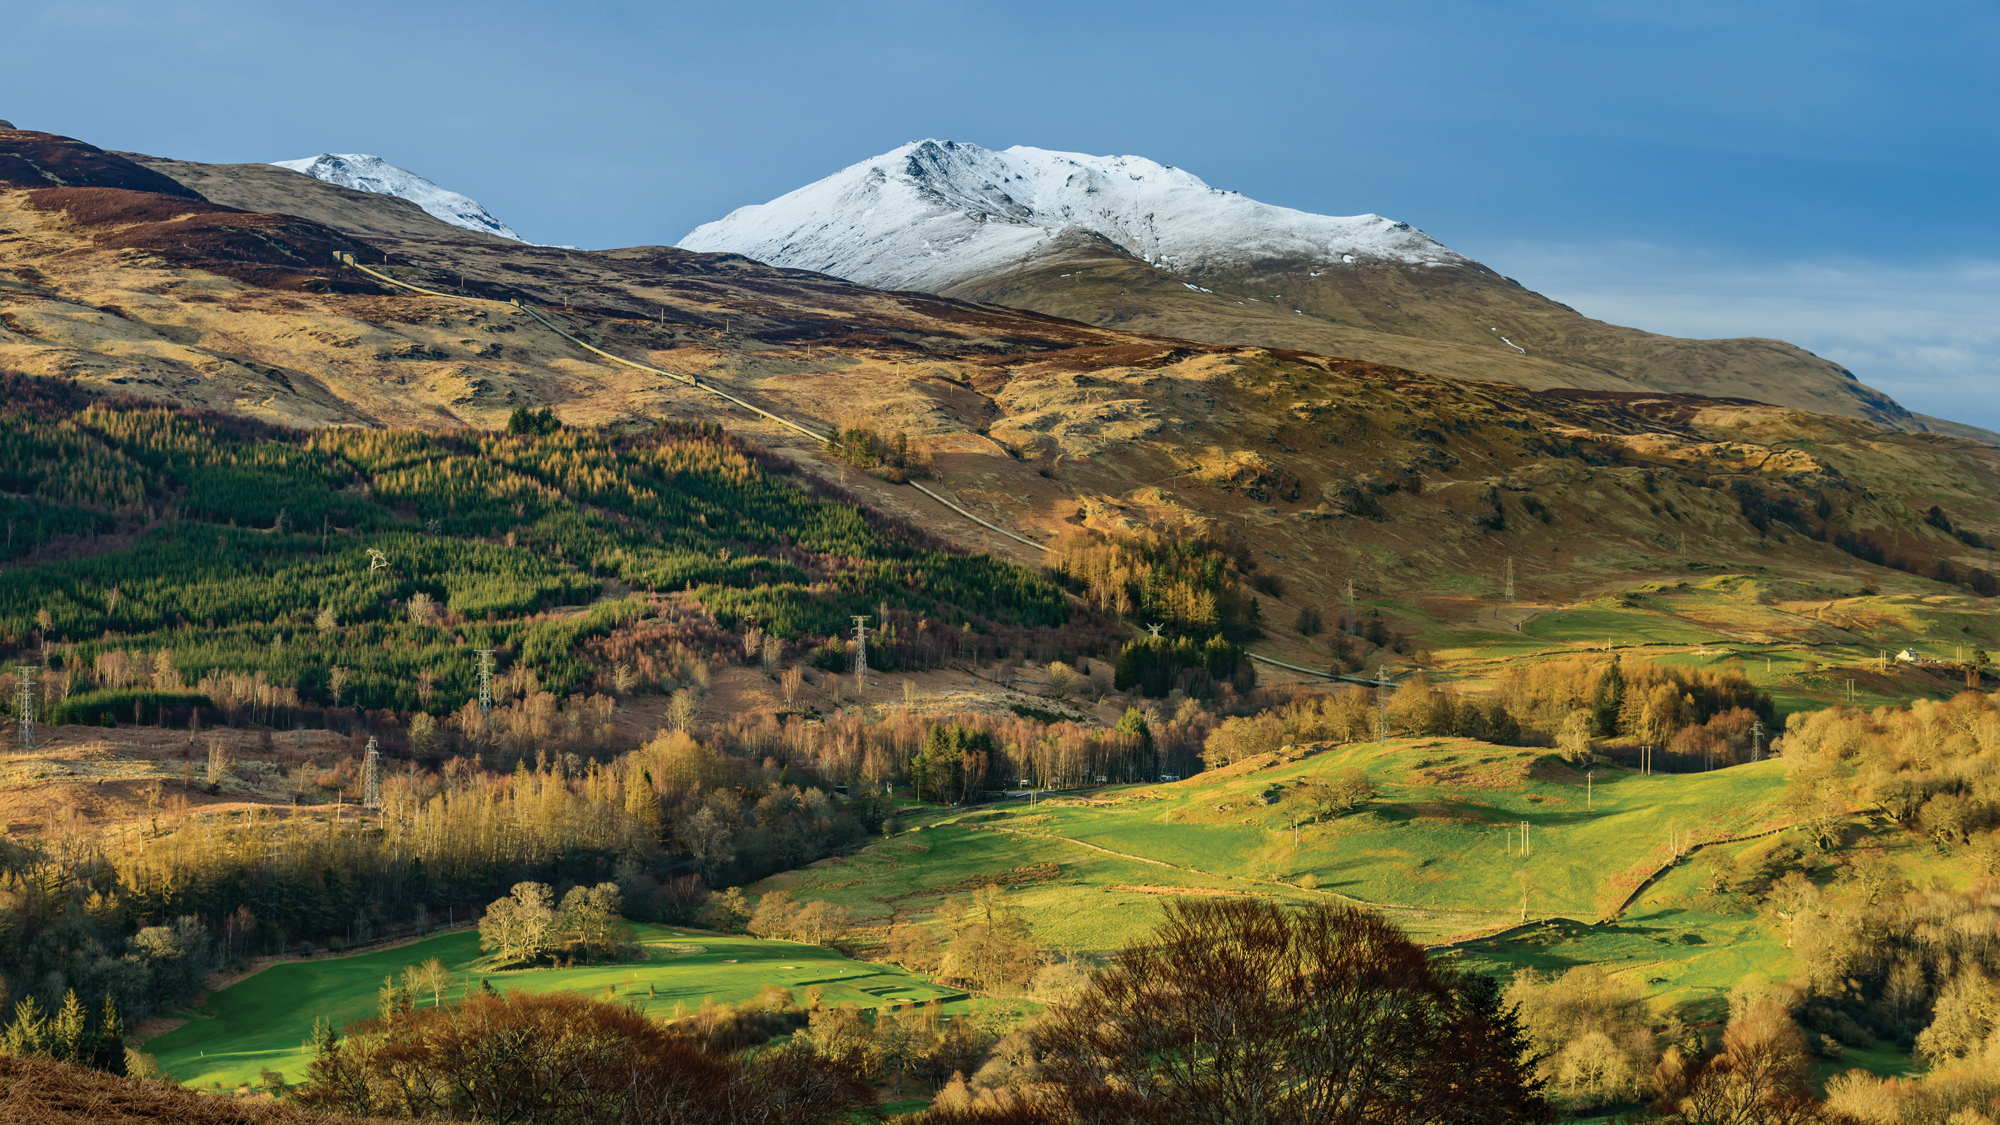 View of Ben Lawers National Nature Reserve